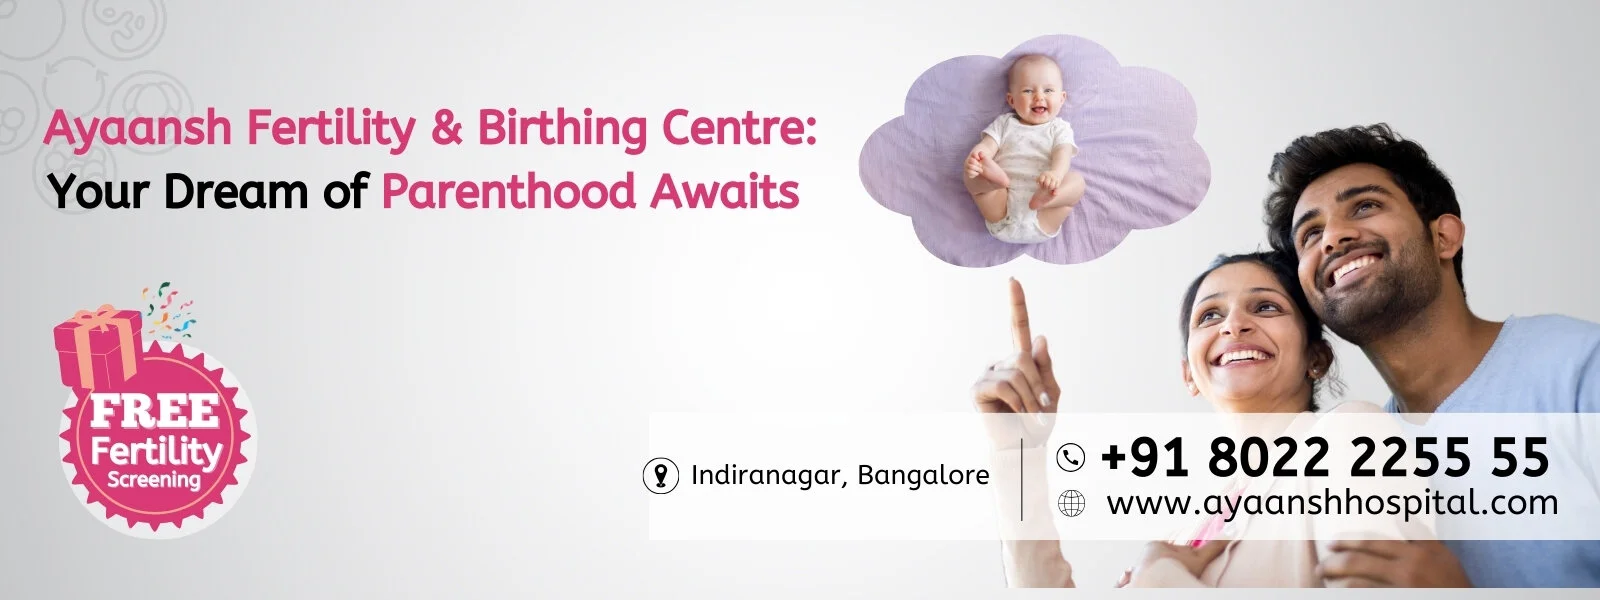 best ivf treatment in bangalore